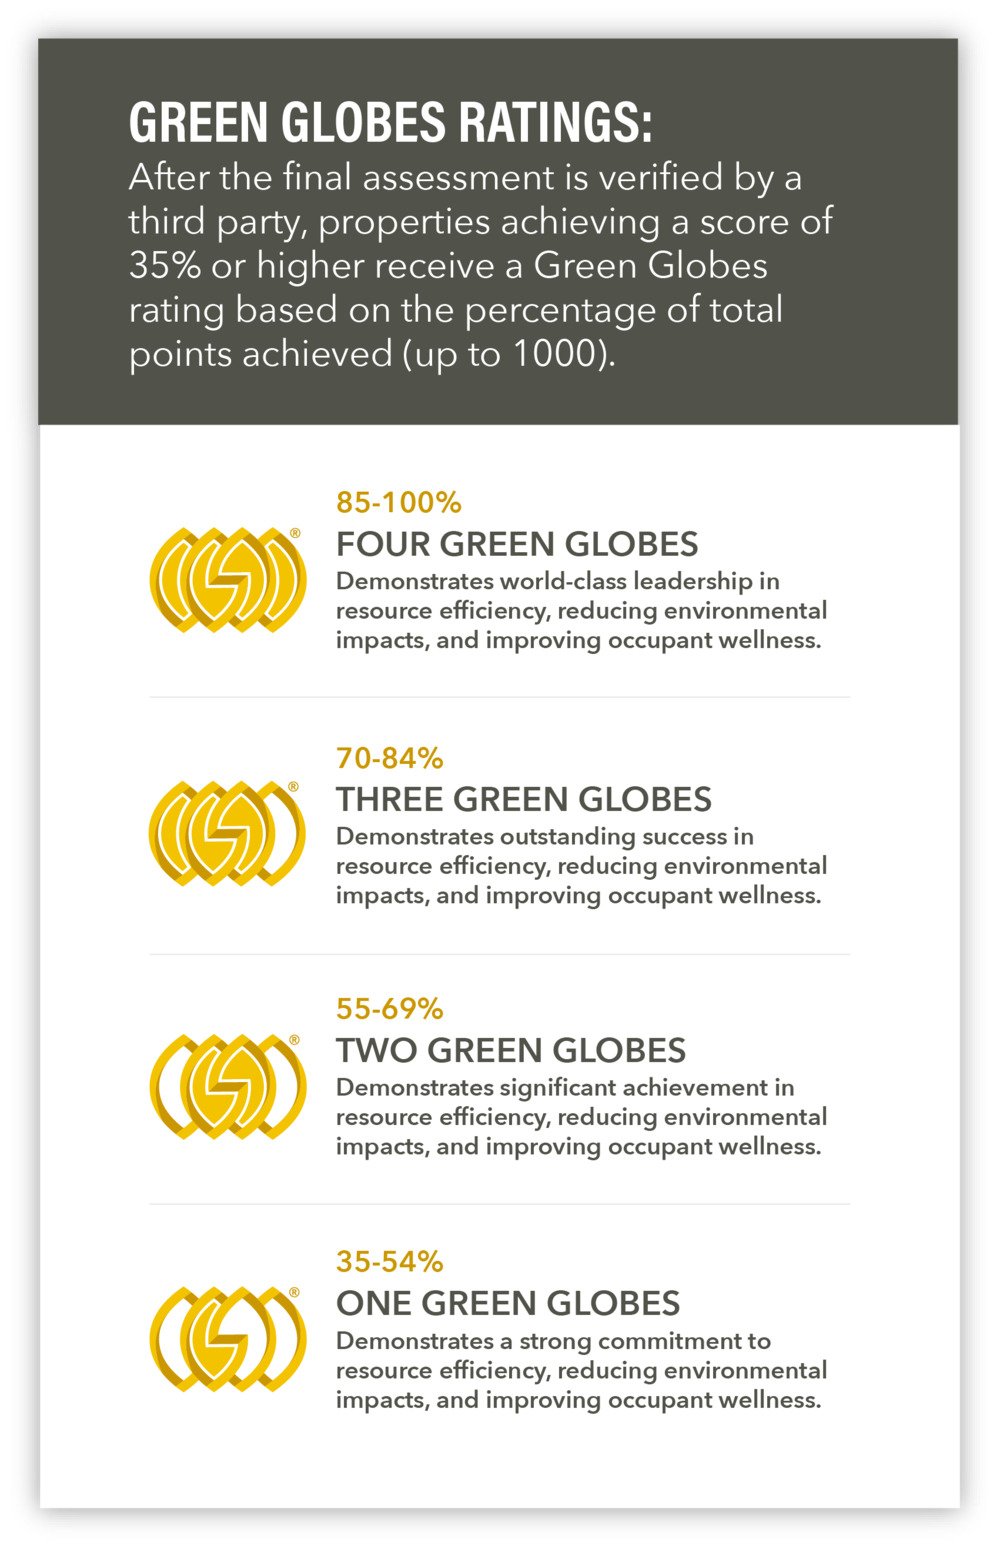 a list of ratings for Green Globes assessment starting from one to four Green Globes